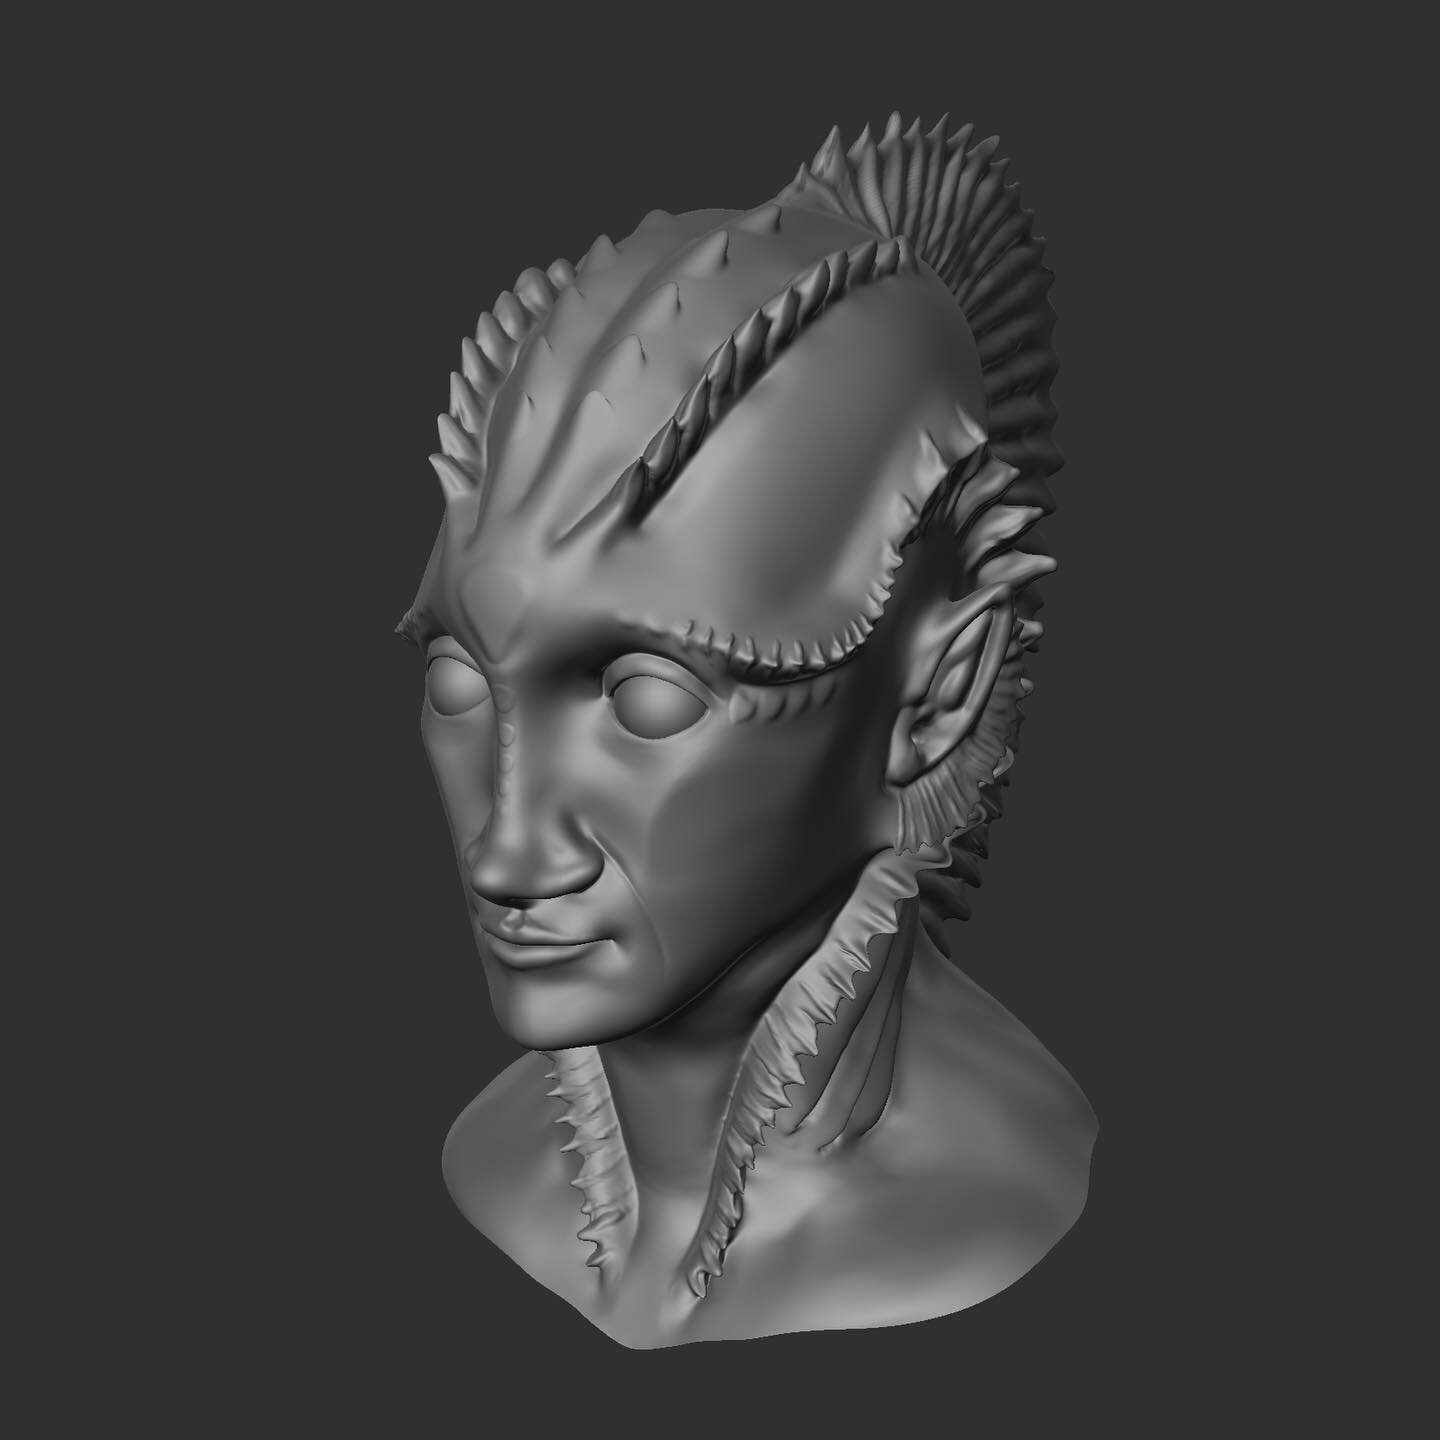 Playing around in #forgerapp I started from the basic bust, not really knowing what I was going to make.  A lot of my ideas come from doodles, and I&rsquo;m pretty happy with this basic design.  She&rsquo;s still a work in progress, but I like the di